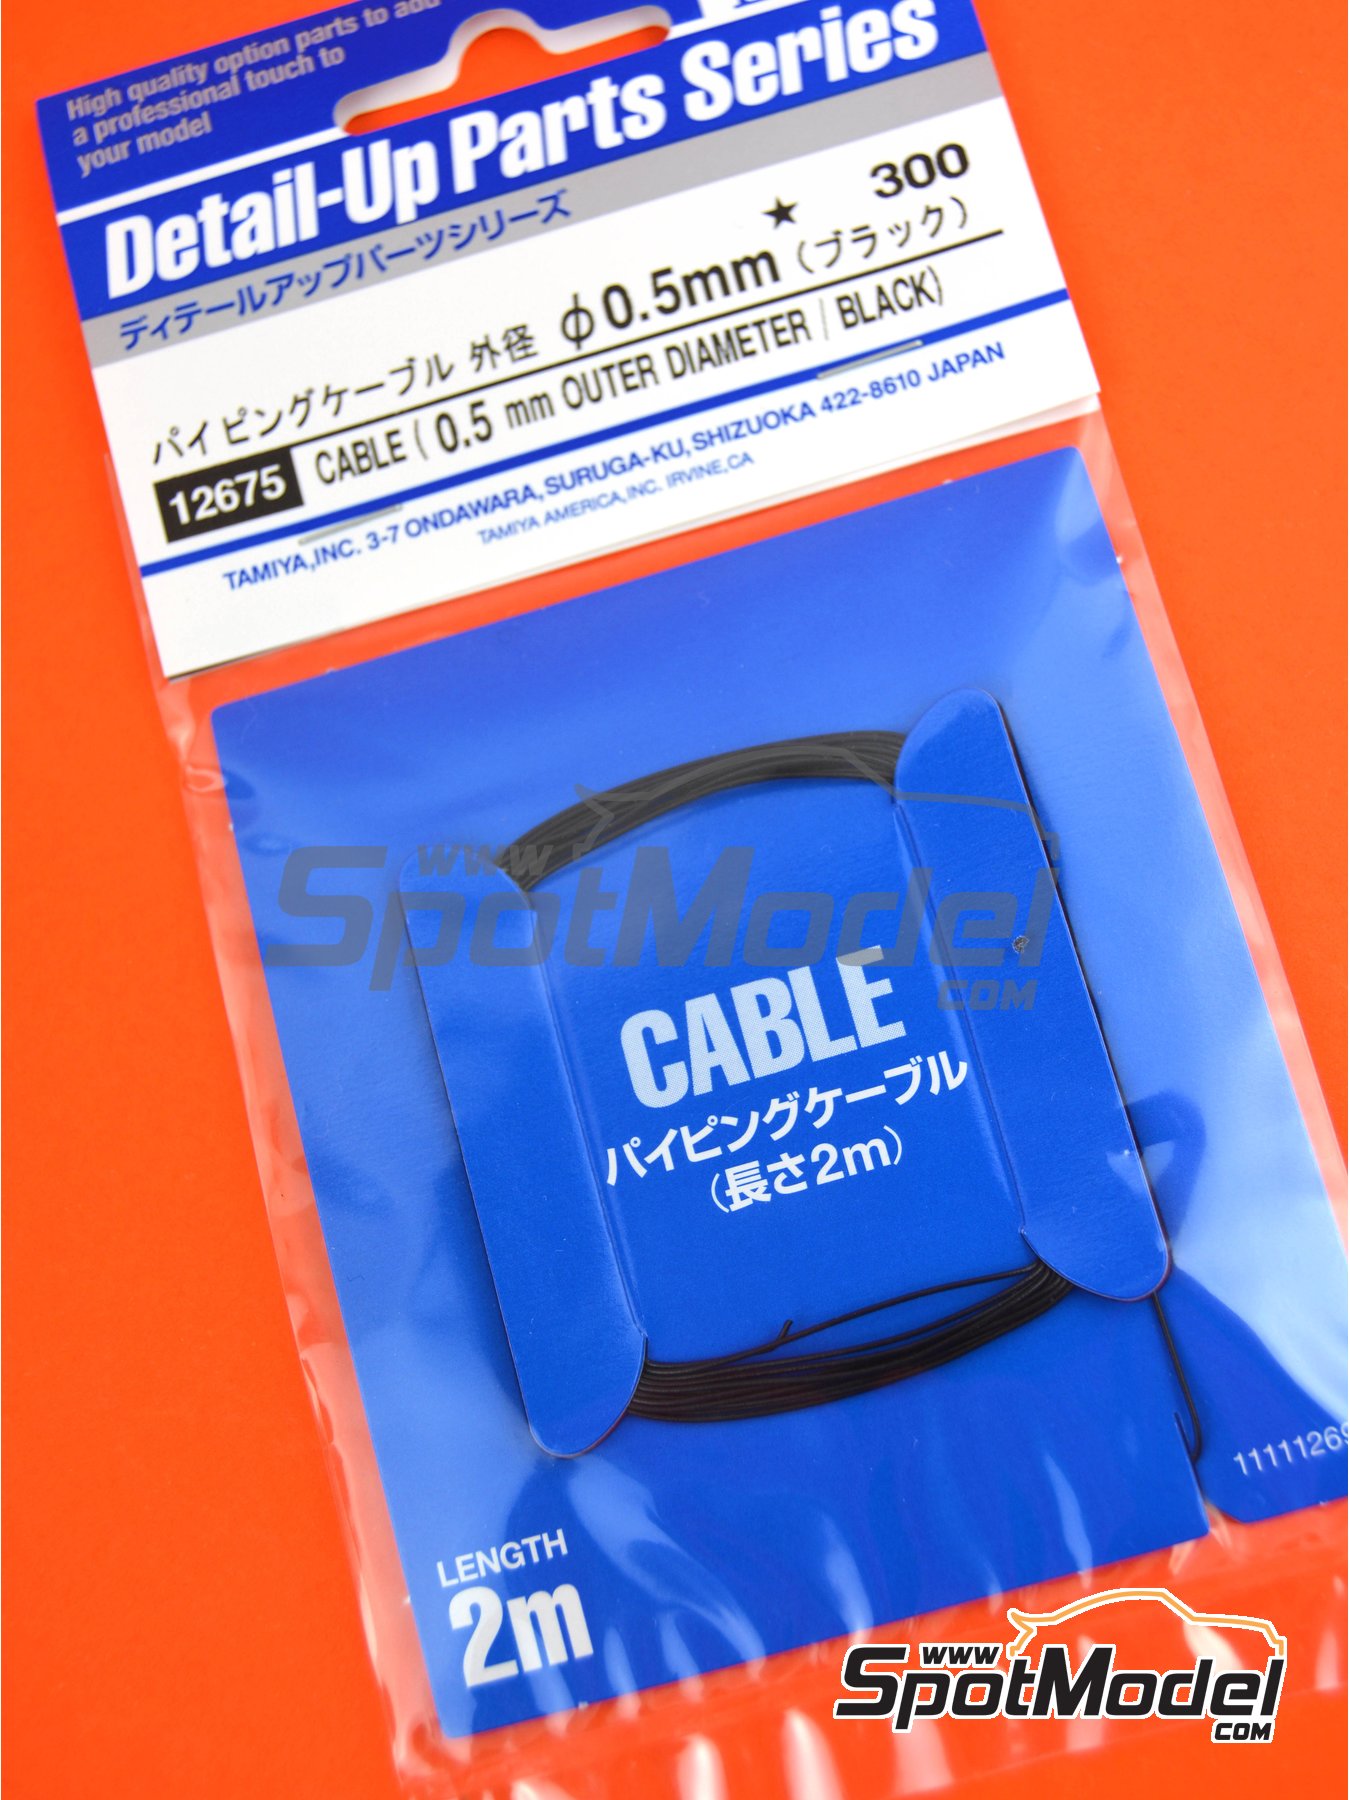 Tamiya Detail-Up Parts Series CABLE 0.5mm OUTER DIAMETER / BLACK 12675 